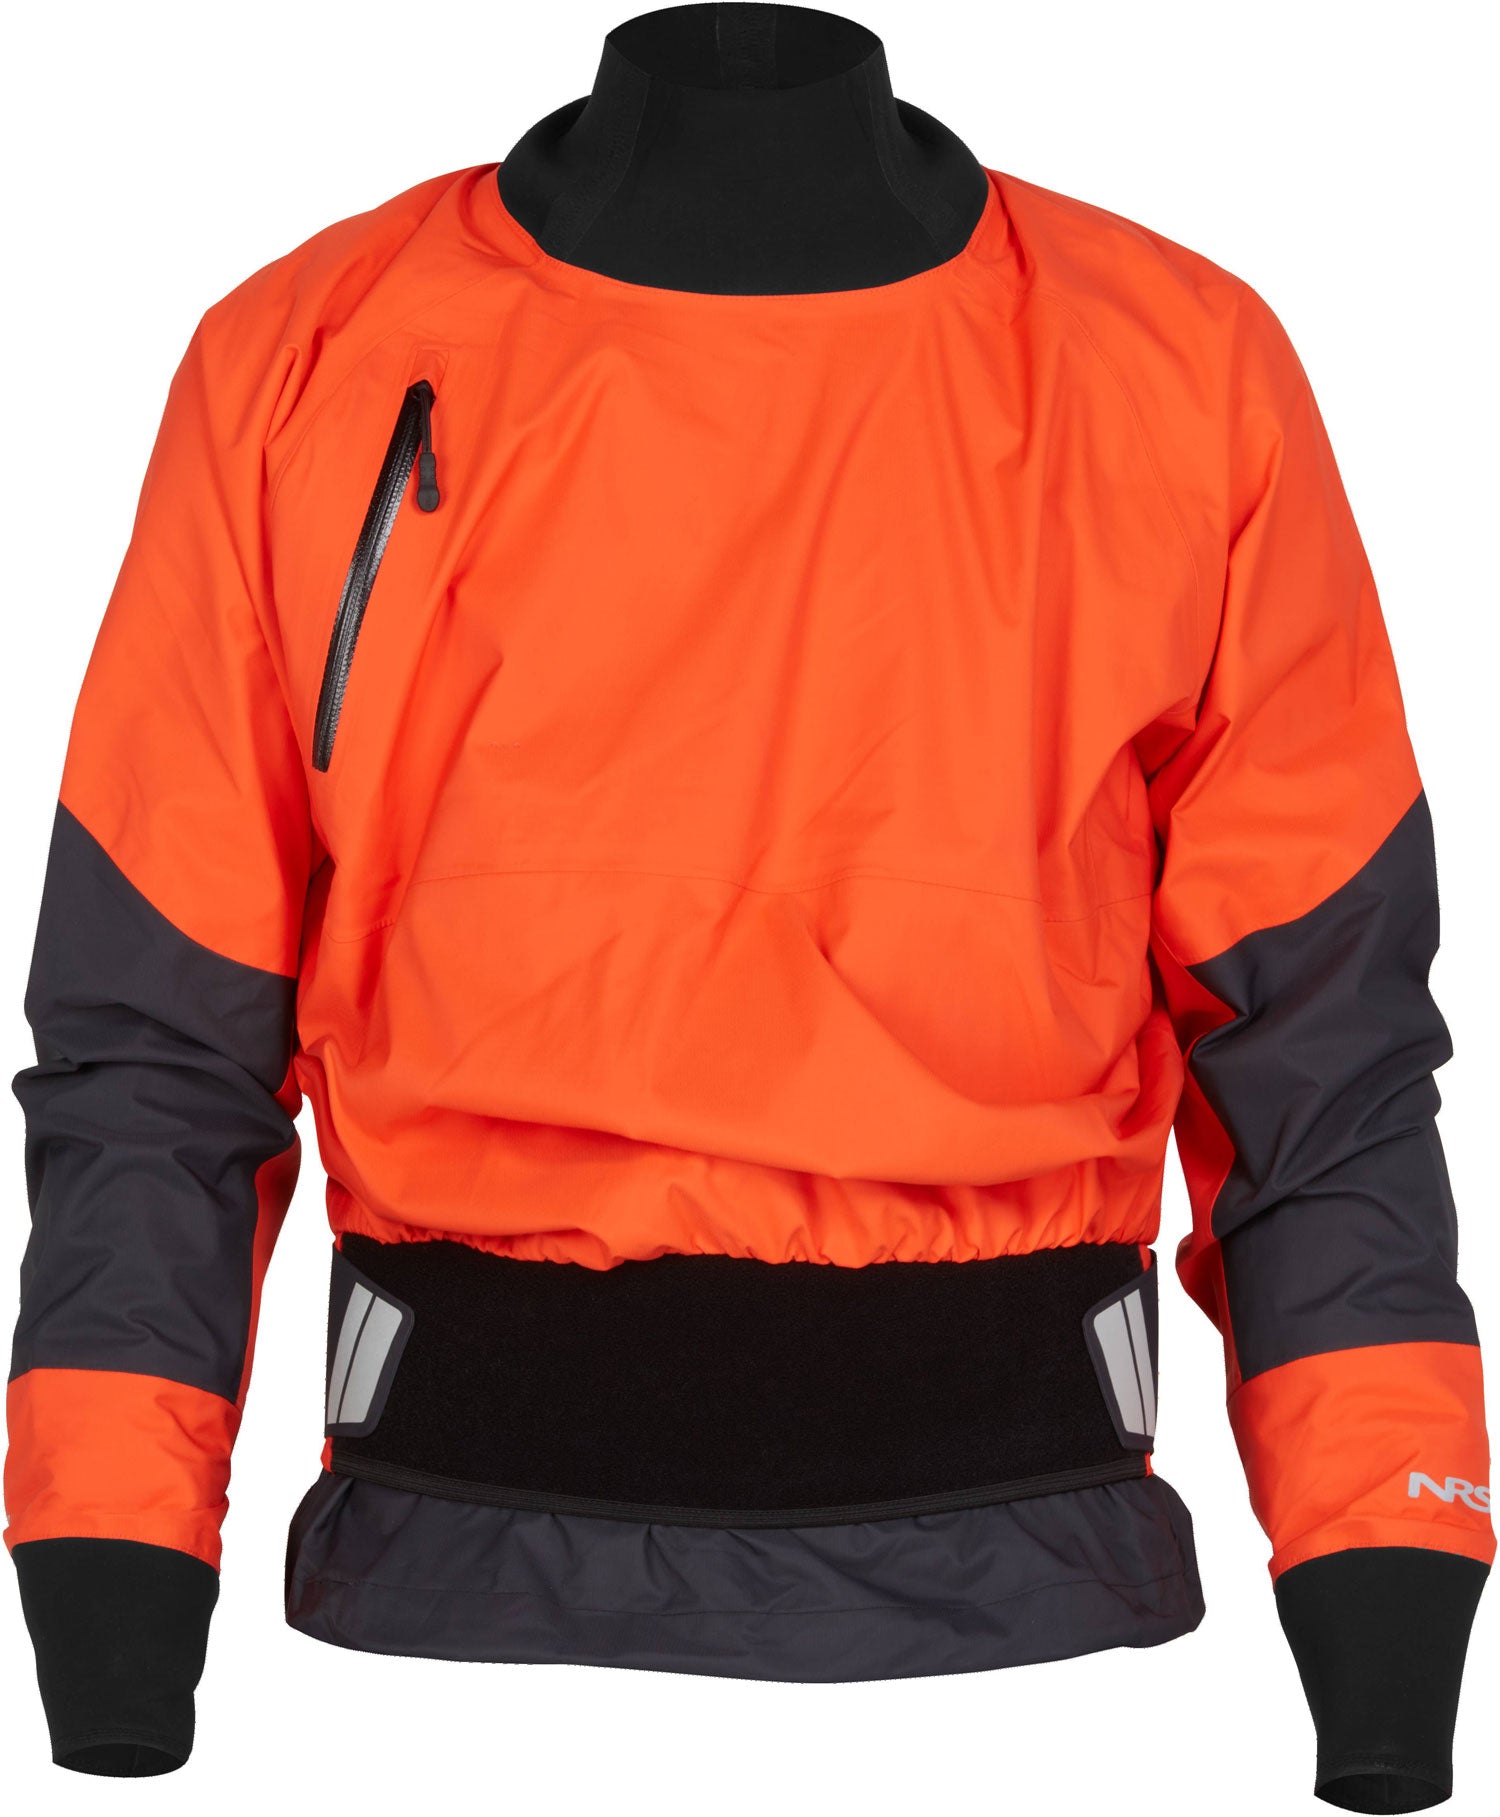 NRS Stratos Paddling Jacket in the Flare/Orange Colourway